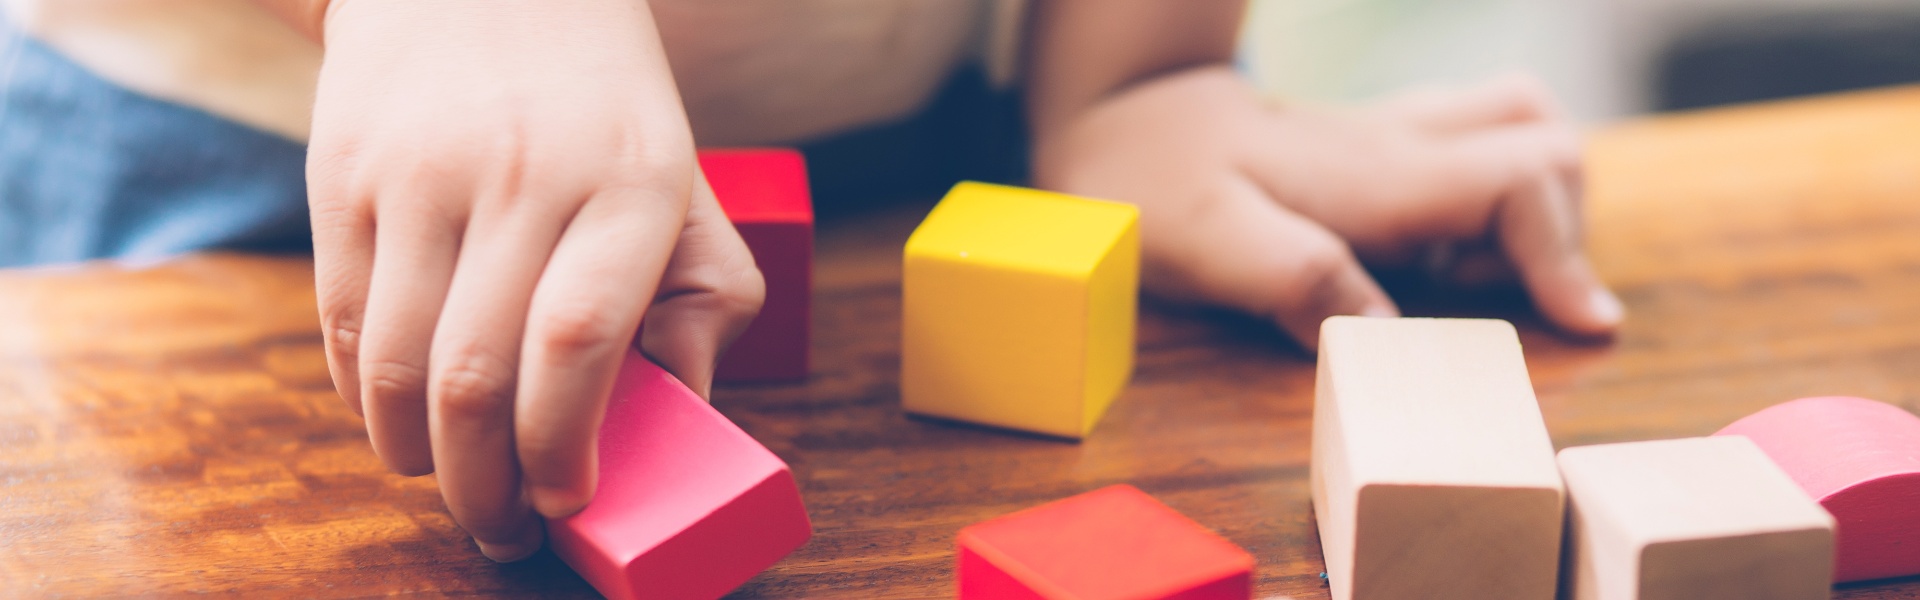 Caregiver-Mediated Services - Child Playing with Blocks